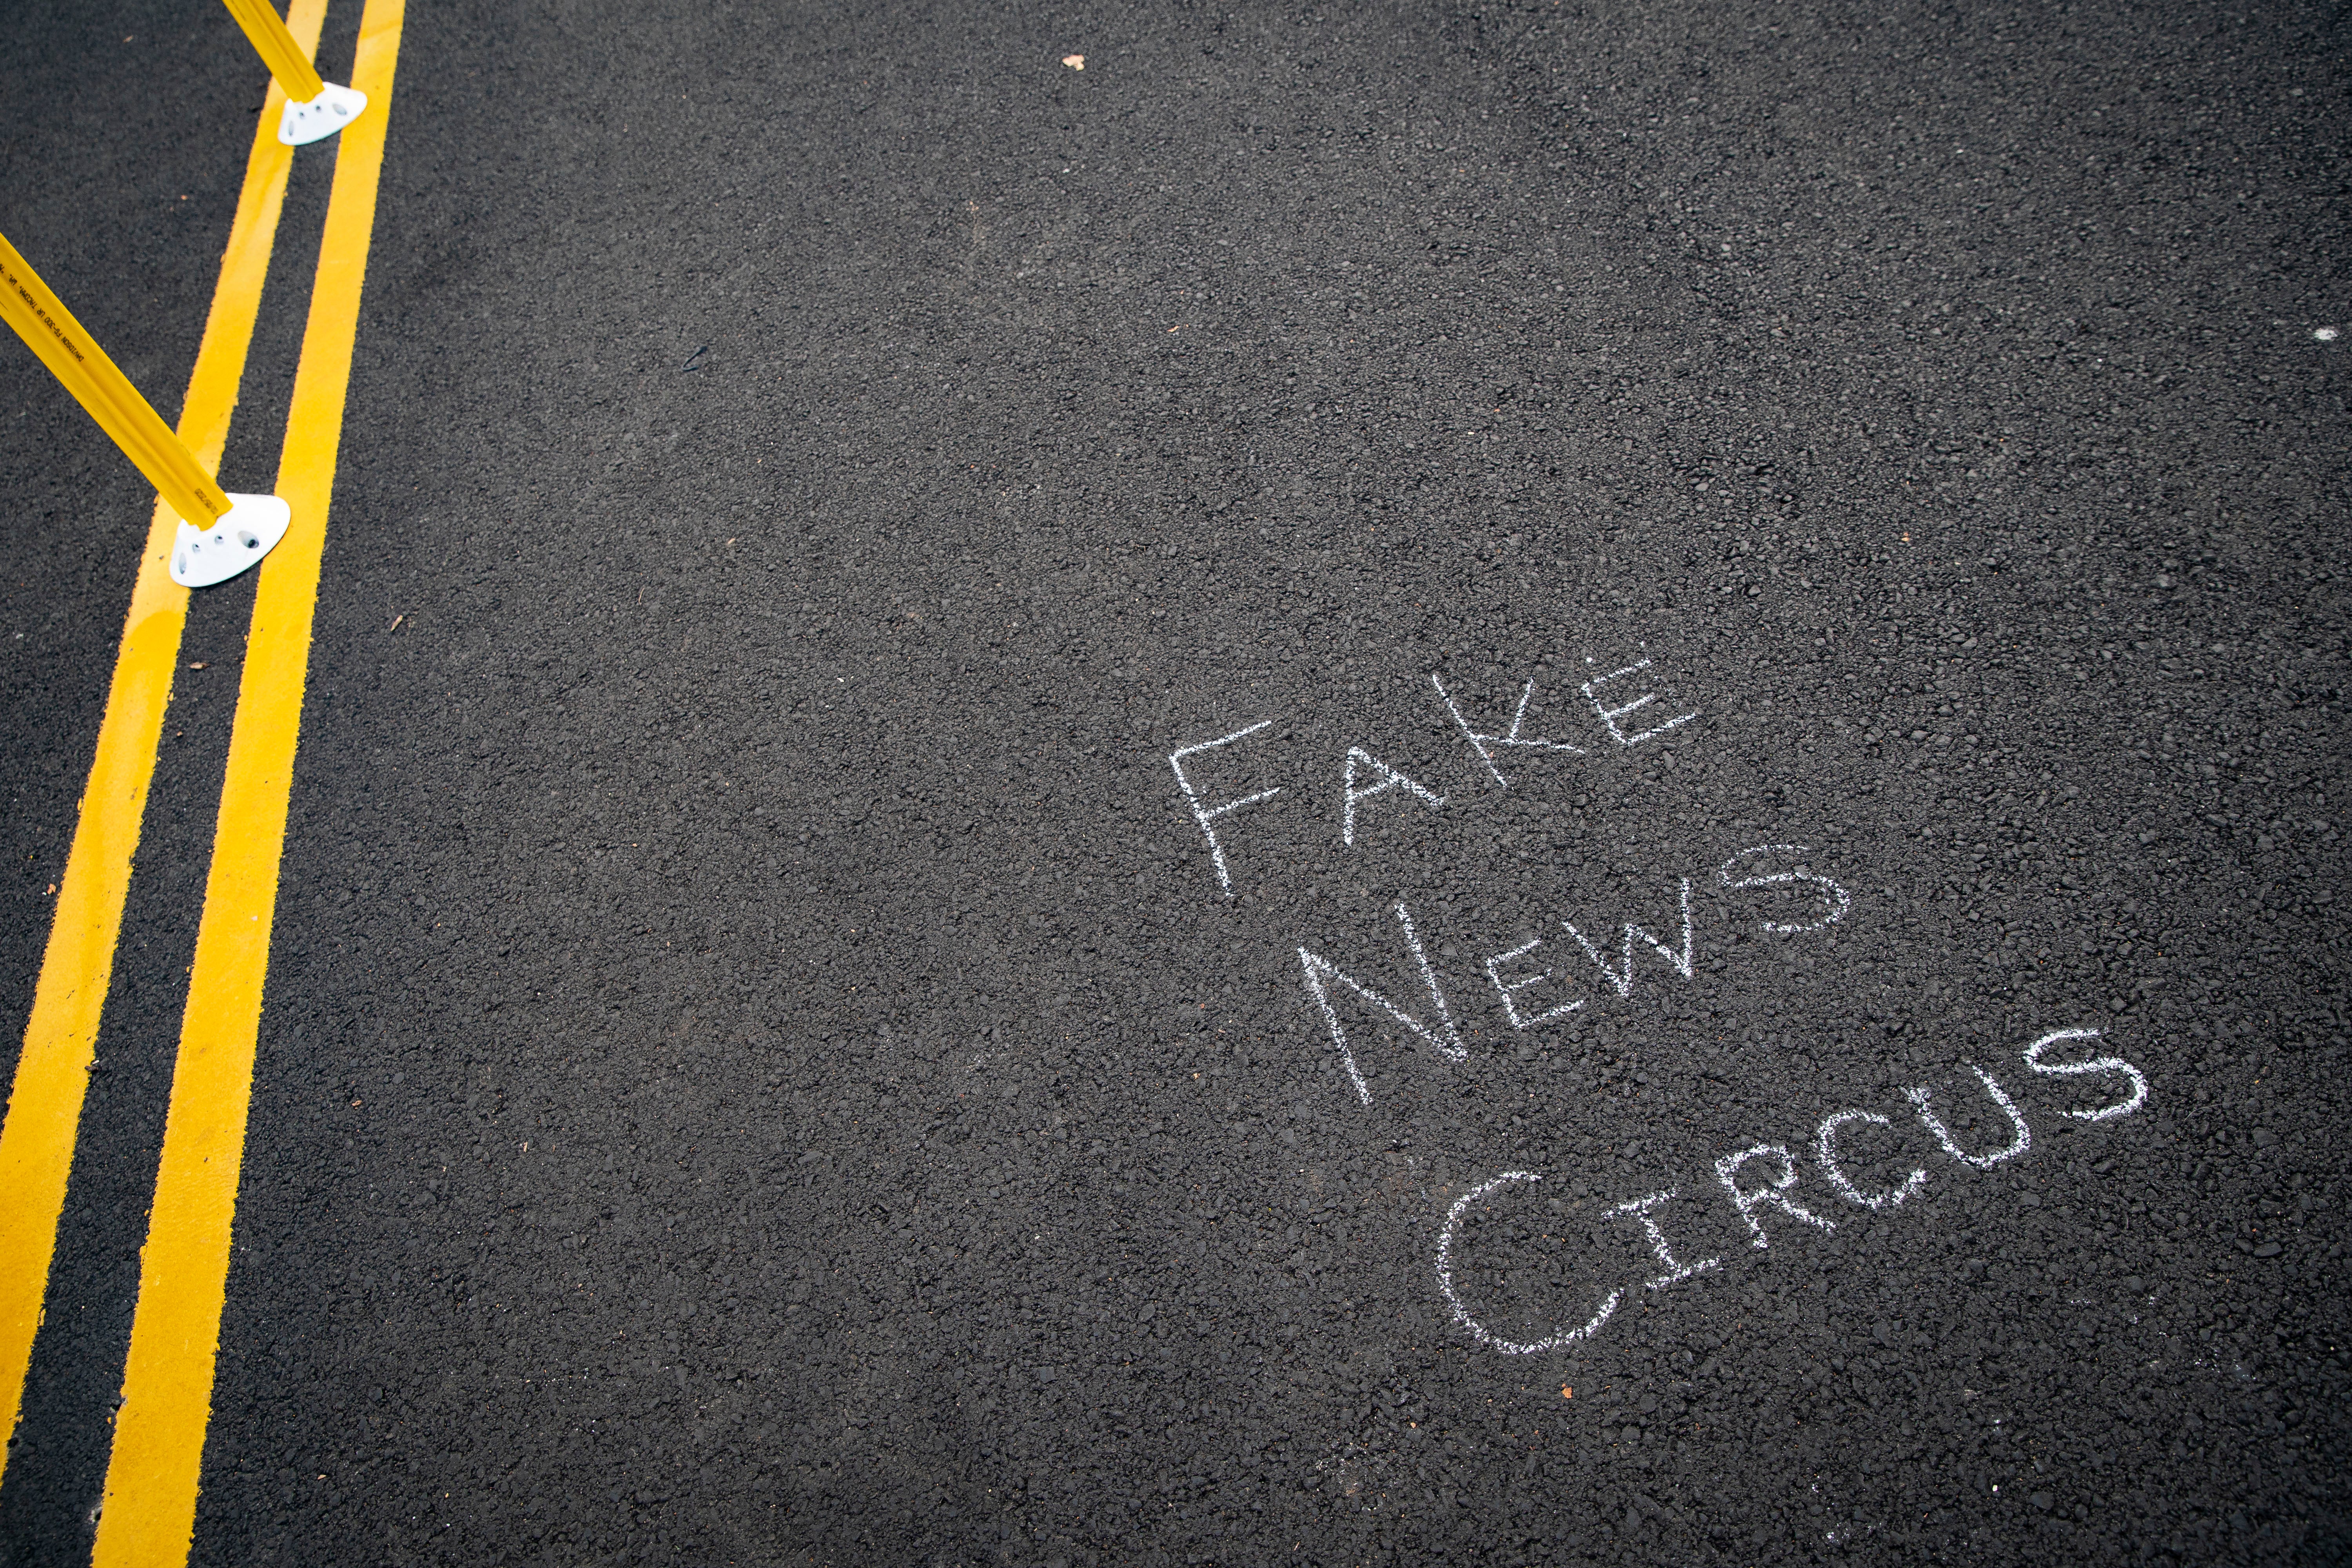 <p>Representative: A chalk message about "Fake News" is written on the street at Black Lives Matter Plaza near the White House, on 5 November 2020 in Washington, DC</p>